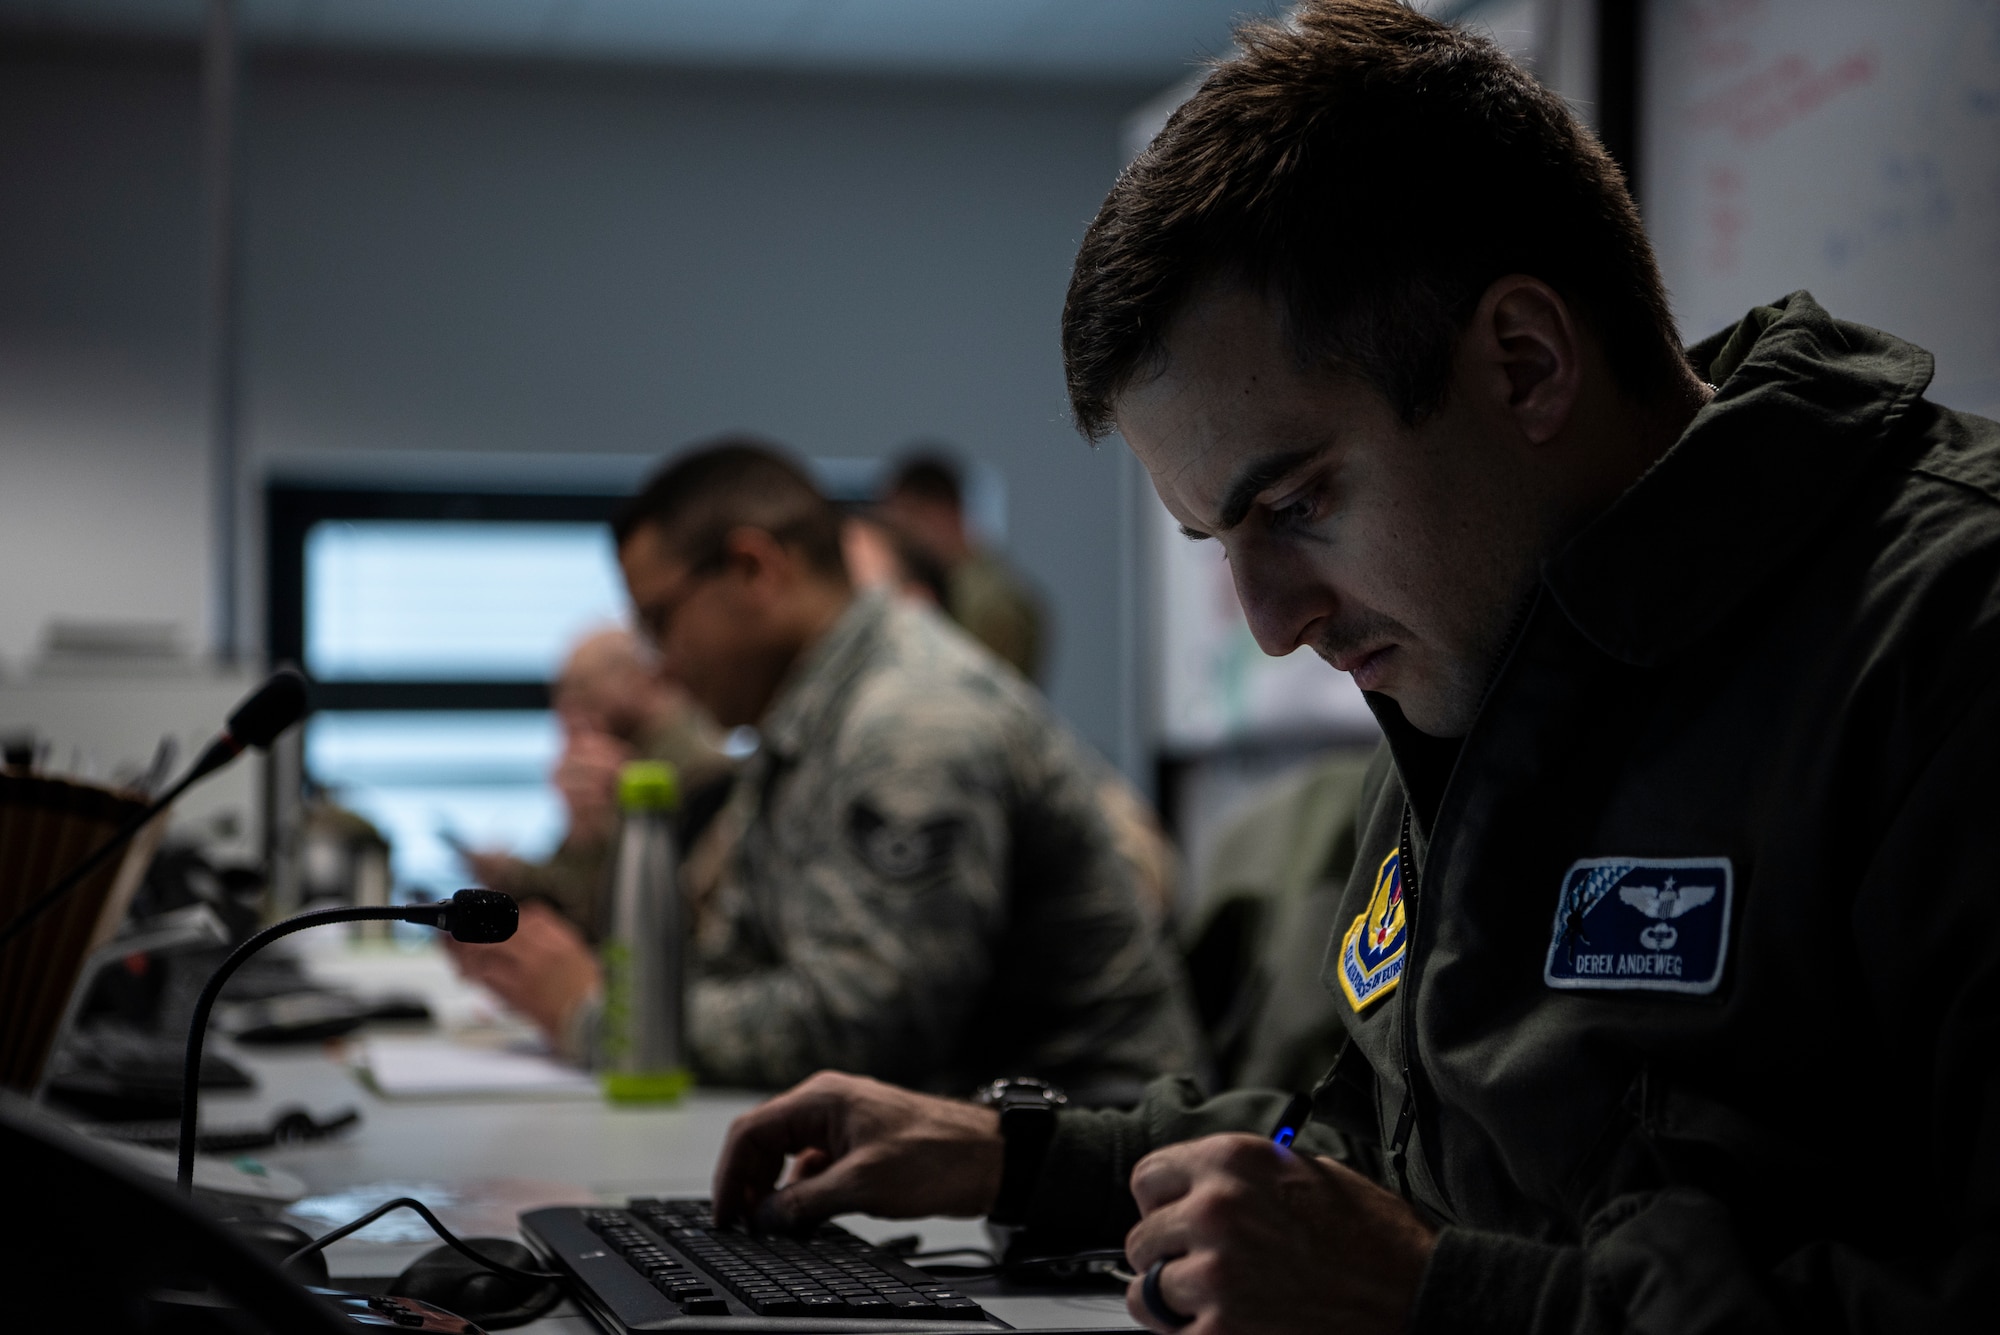 U.S. Air Force Maj. Derek Andeweg, 37th Airlift Squadron assistant director of operations, writes notes during a meeting with the Operational Planning Team at Ramstein Air Base, Germany, March 24, 2020.